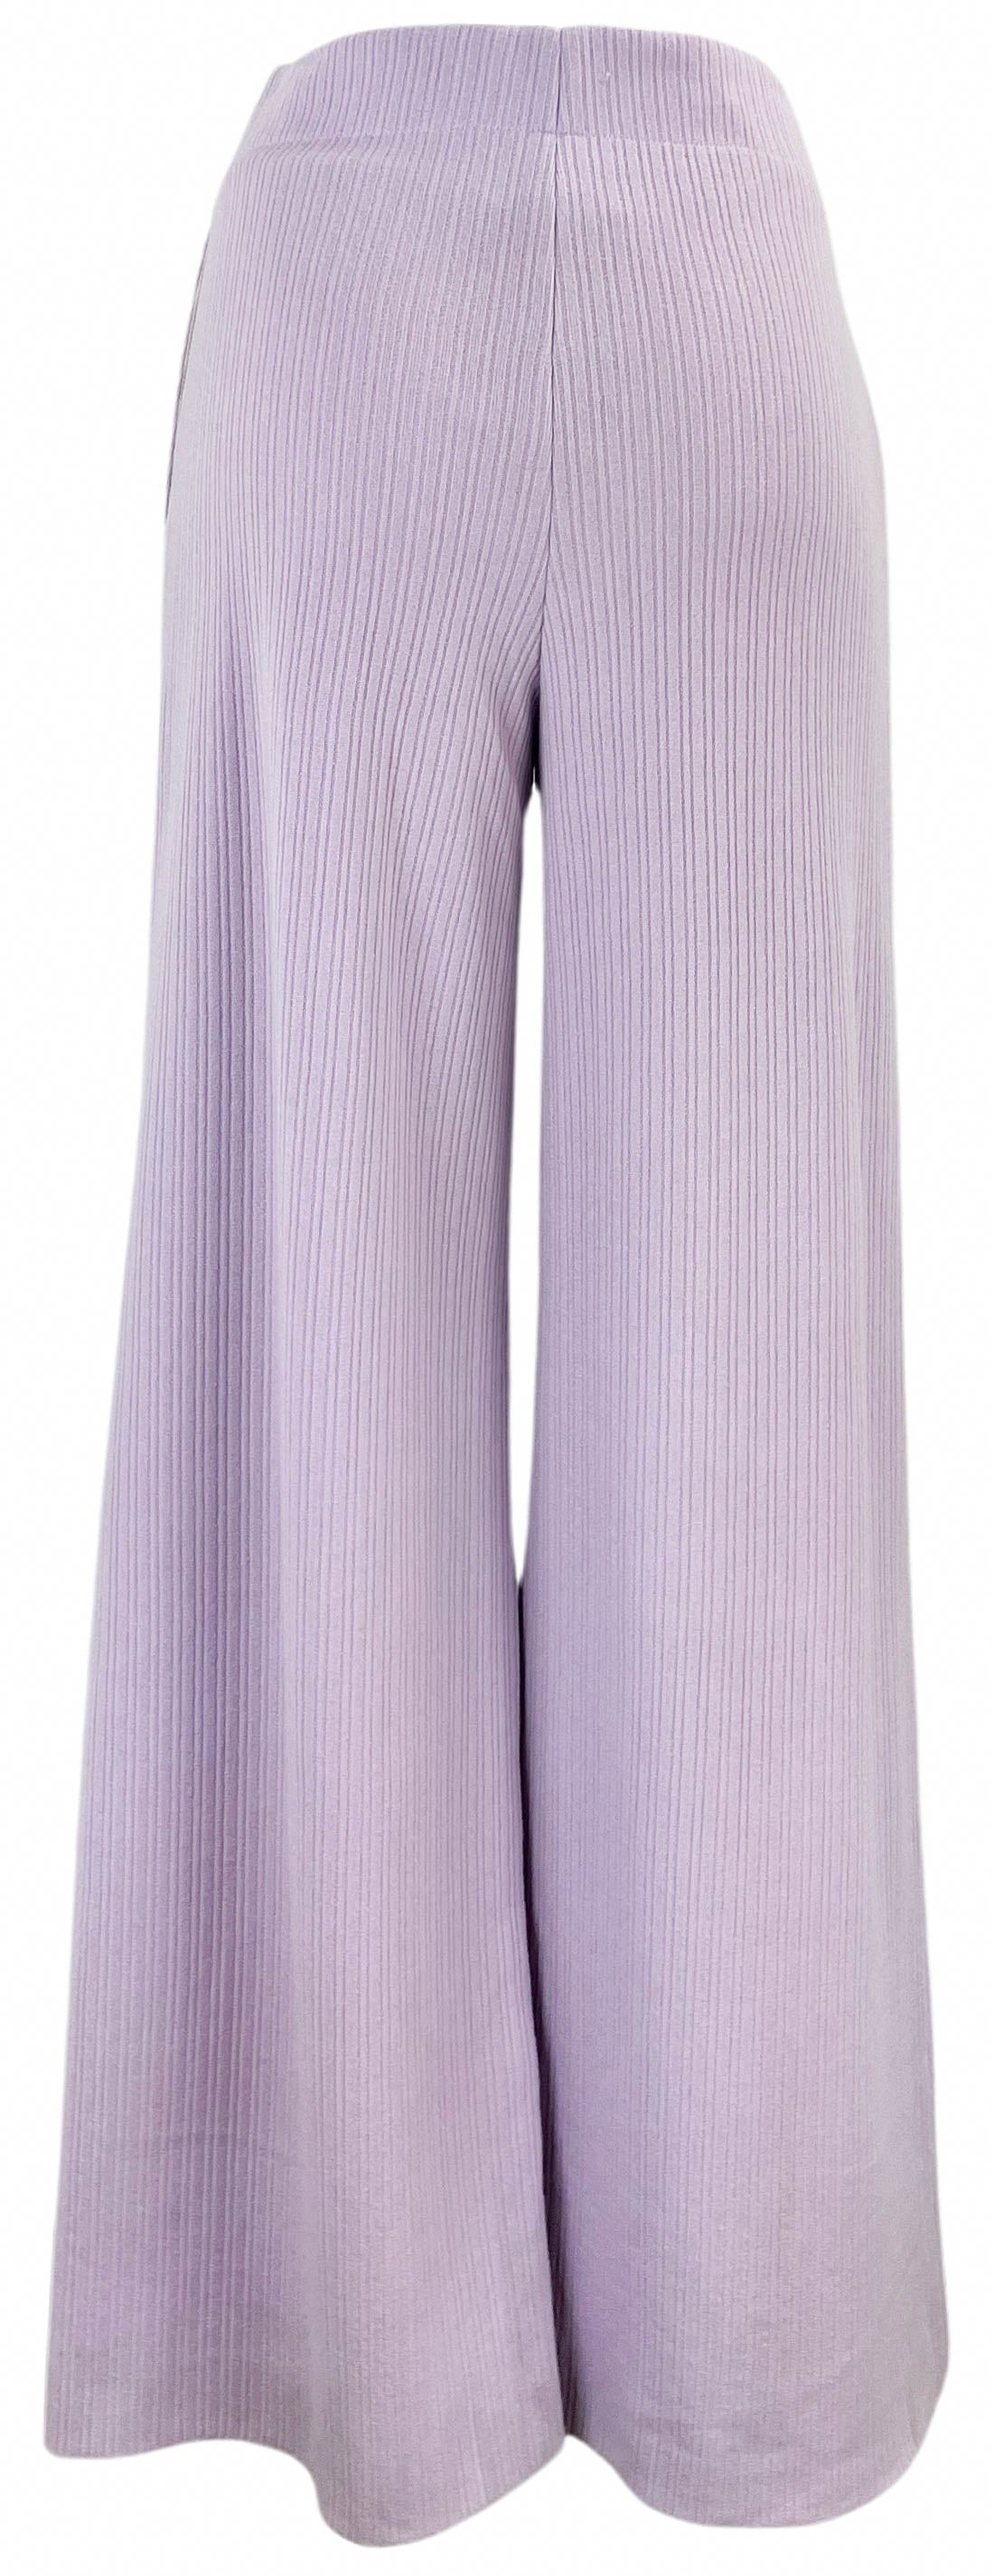 Nells Nelson Joelle Rib Knit Trouser in Lavender - Discounts on Nells Nelson at UAL